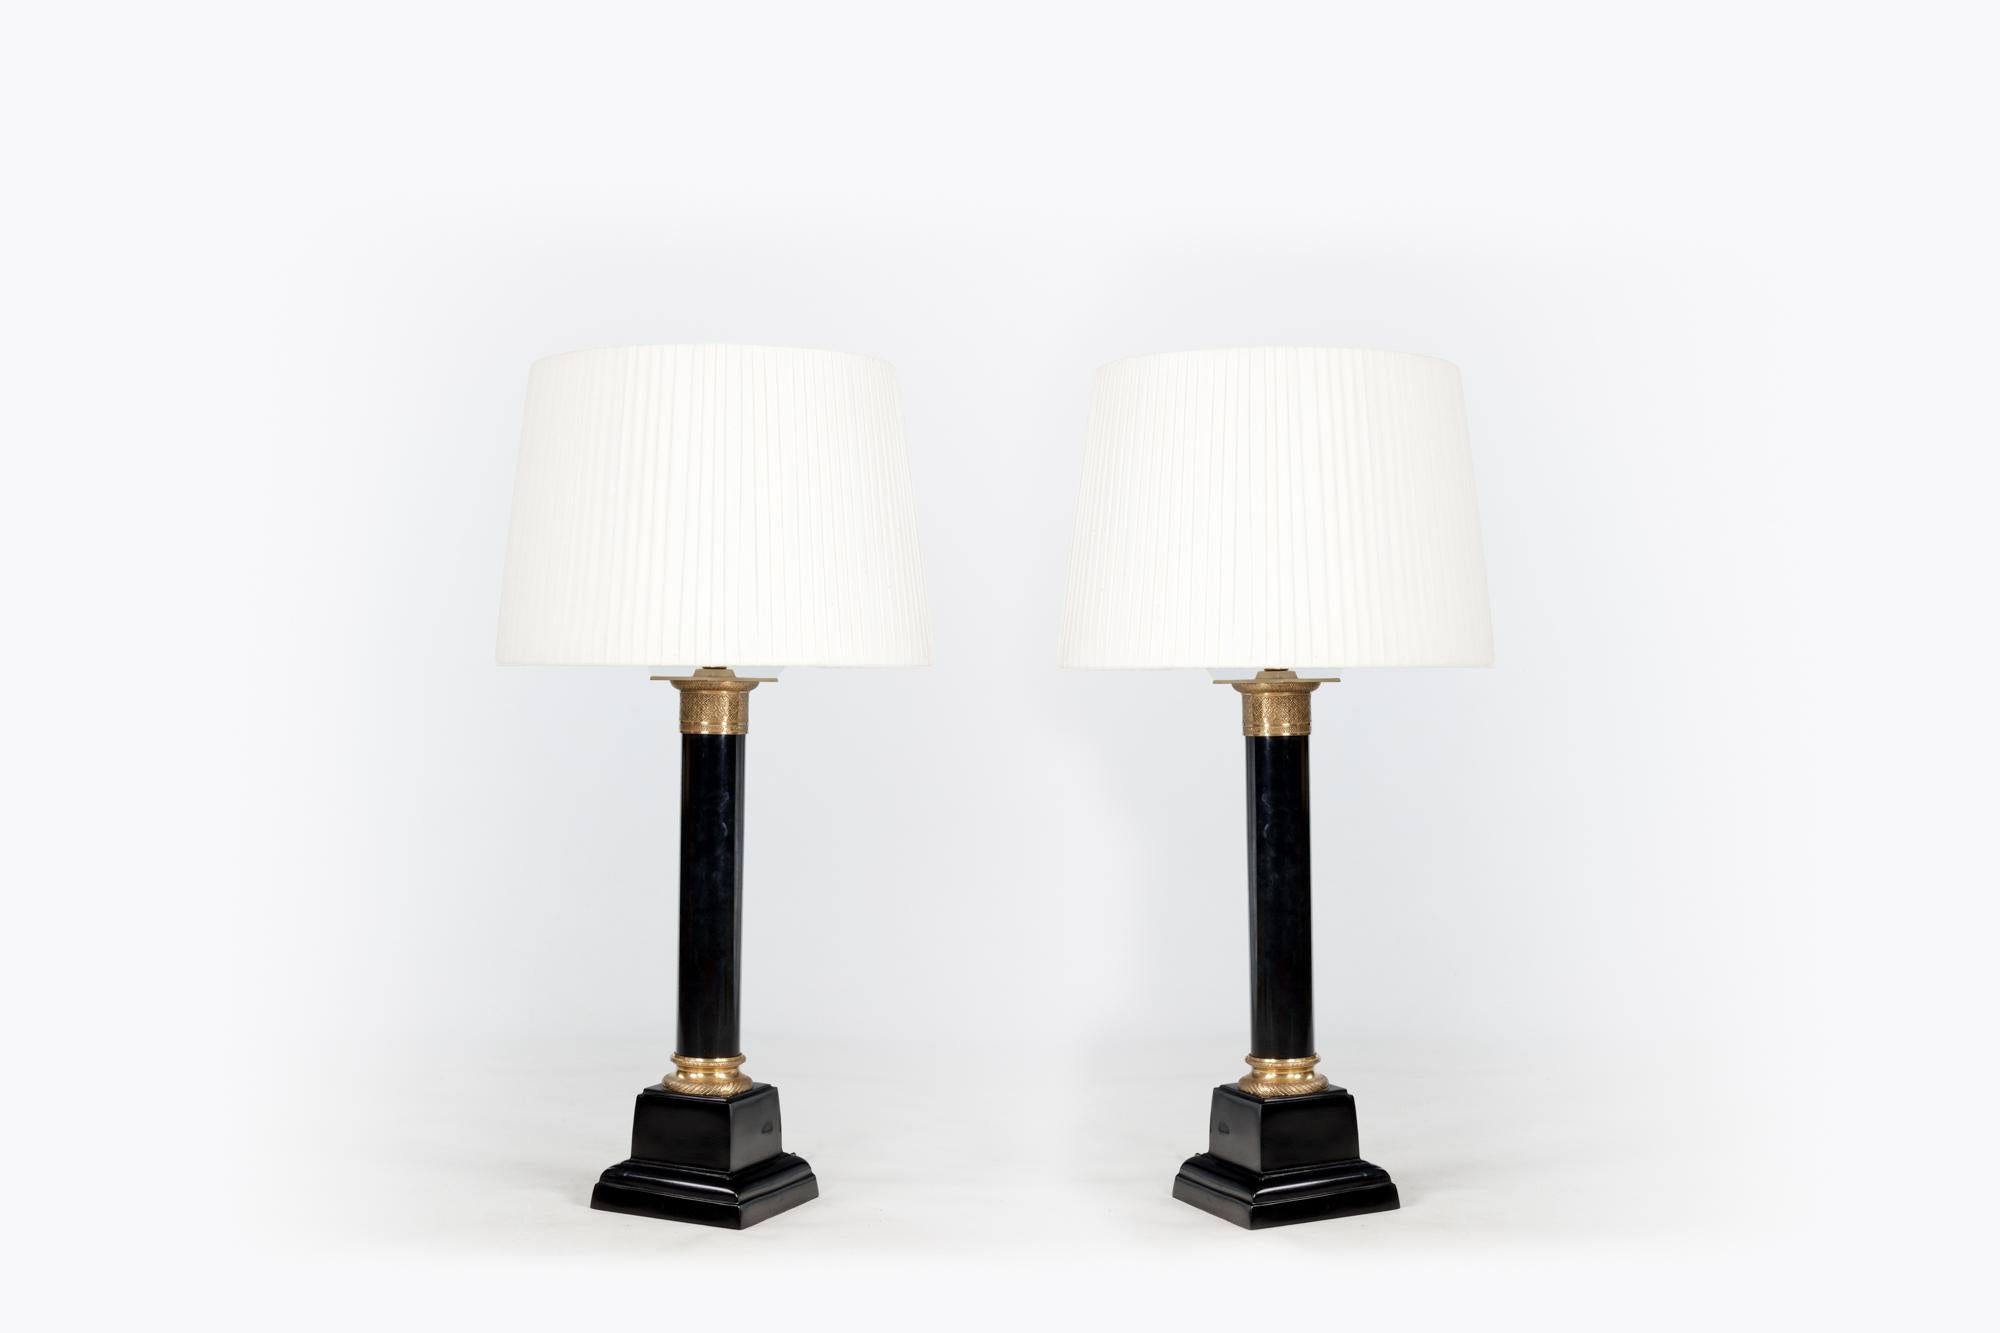 Late 19th century pair of metal column table lamps with ormolu mounted capitals on stepped square bases with a black gloss finish.